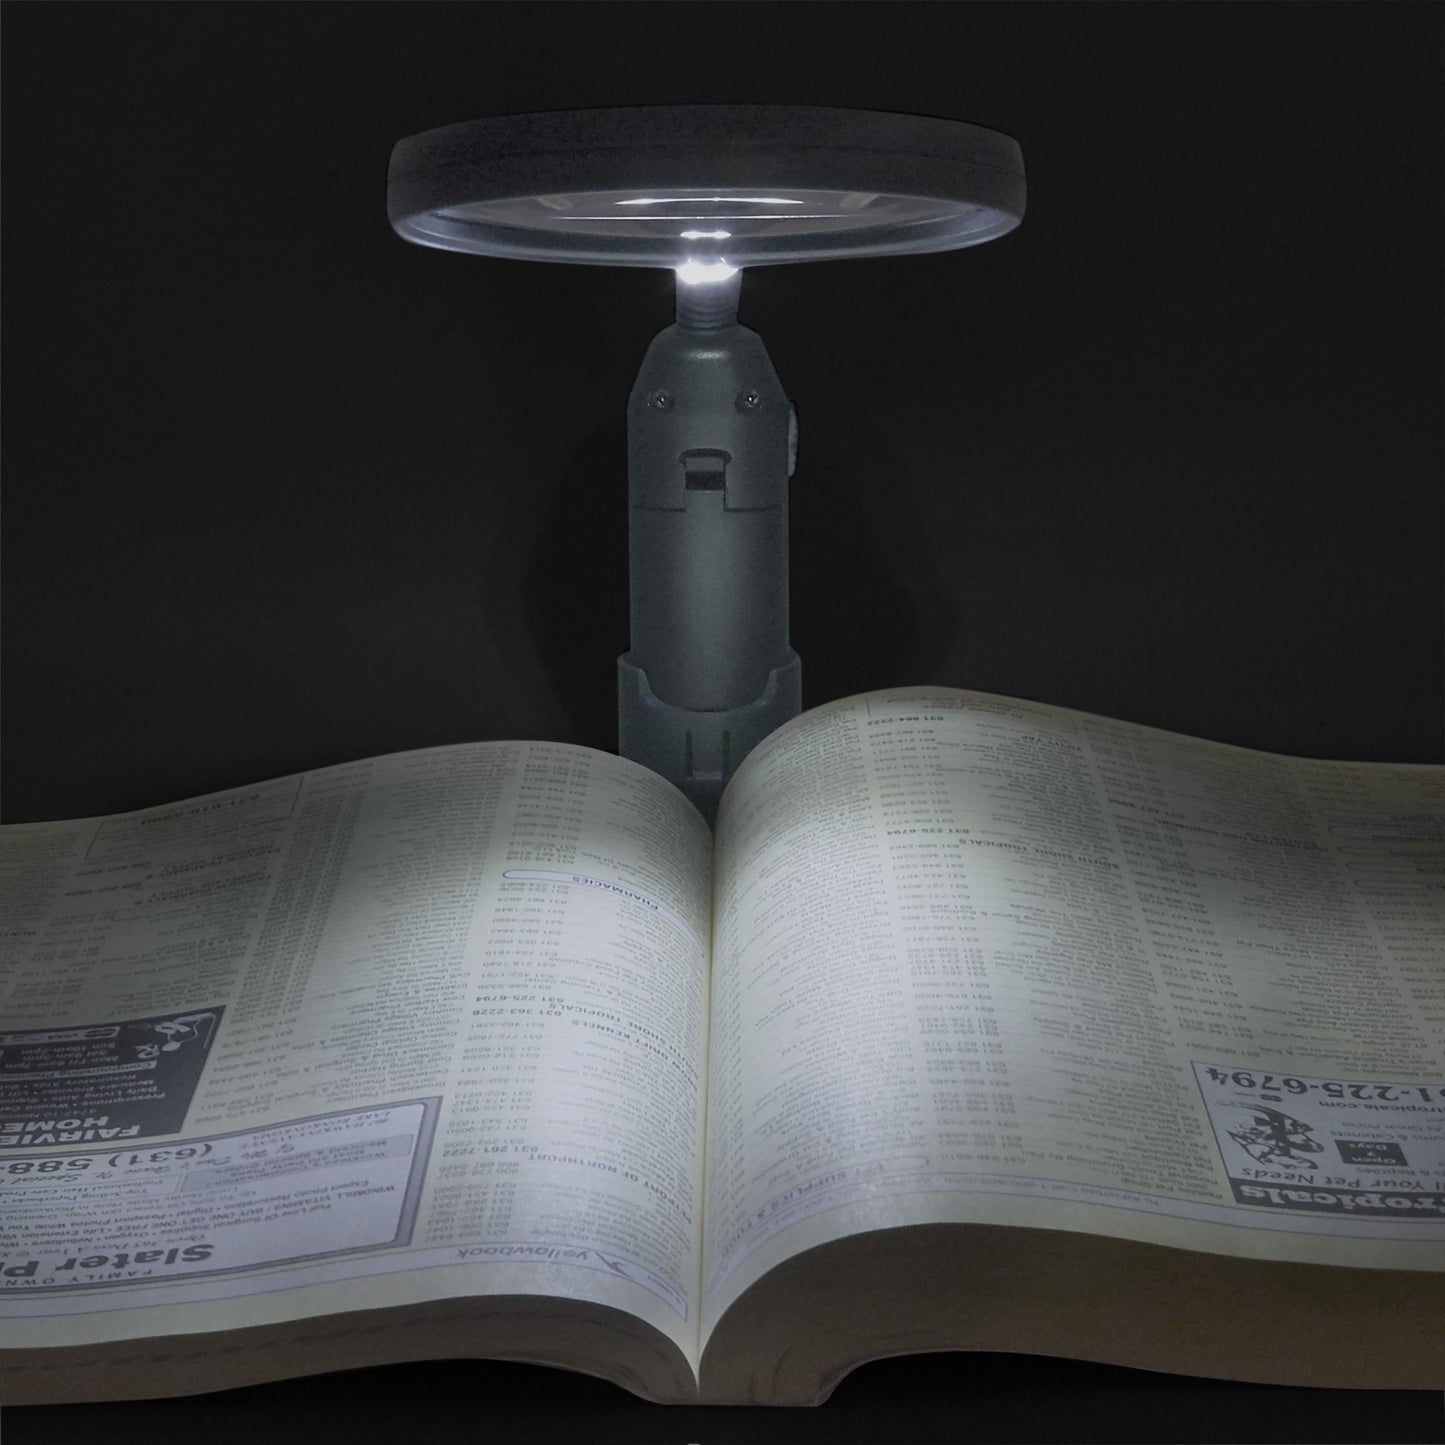 Carson MagniLamp 2x / 3.5x Magnifier with Light and Stand GN-55